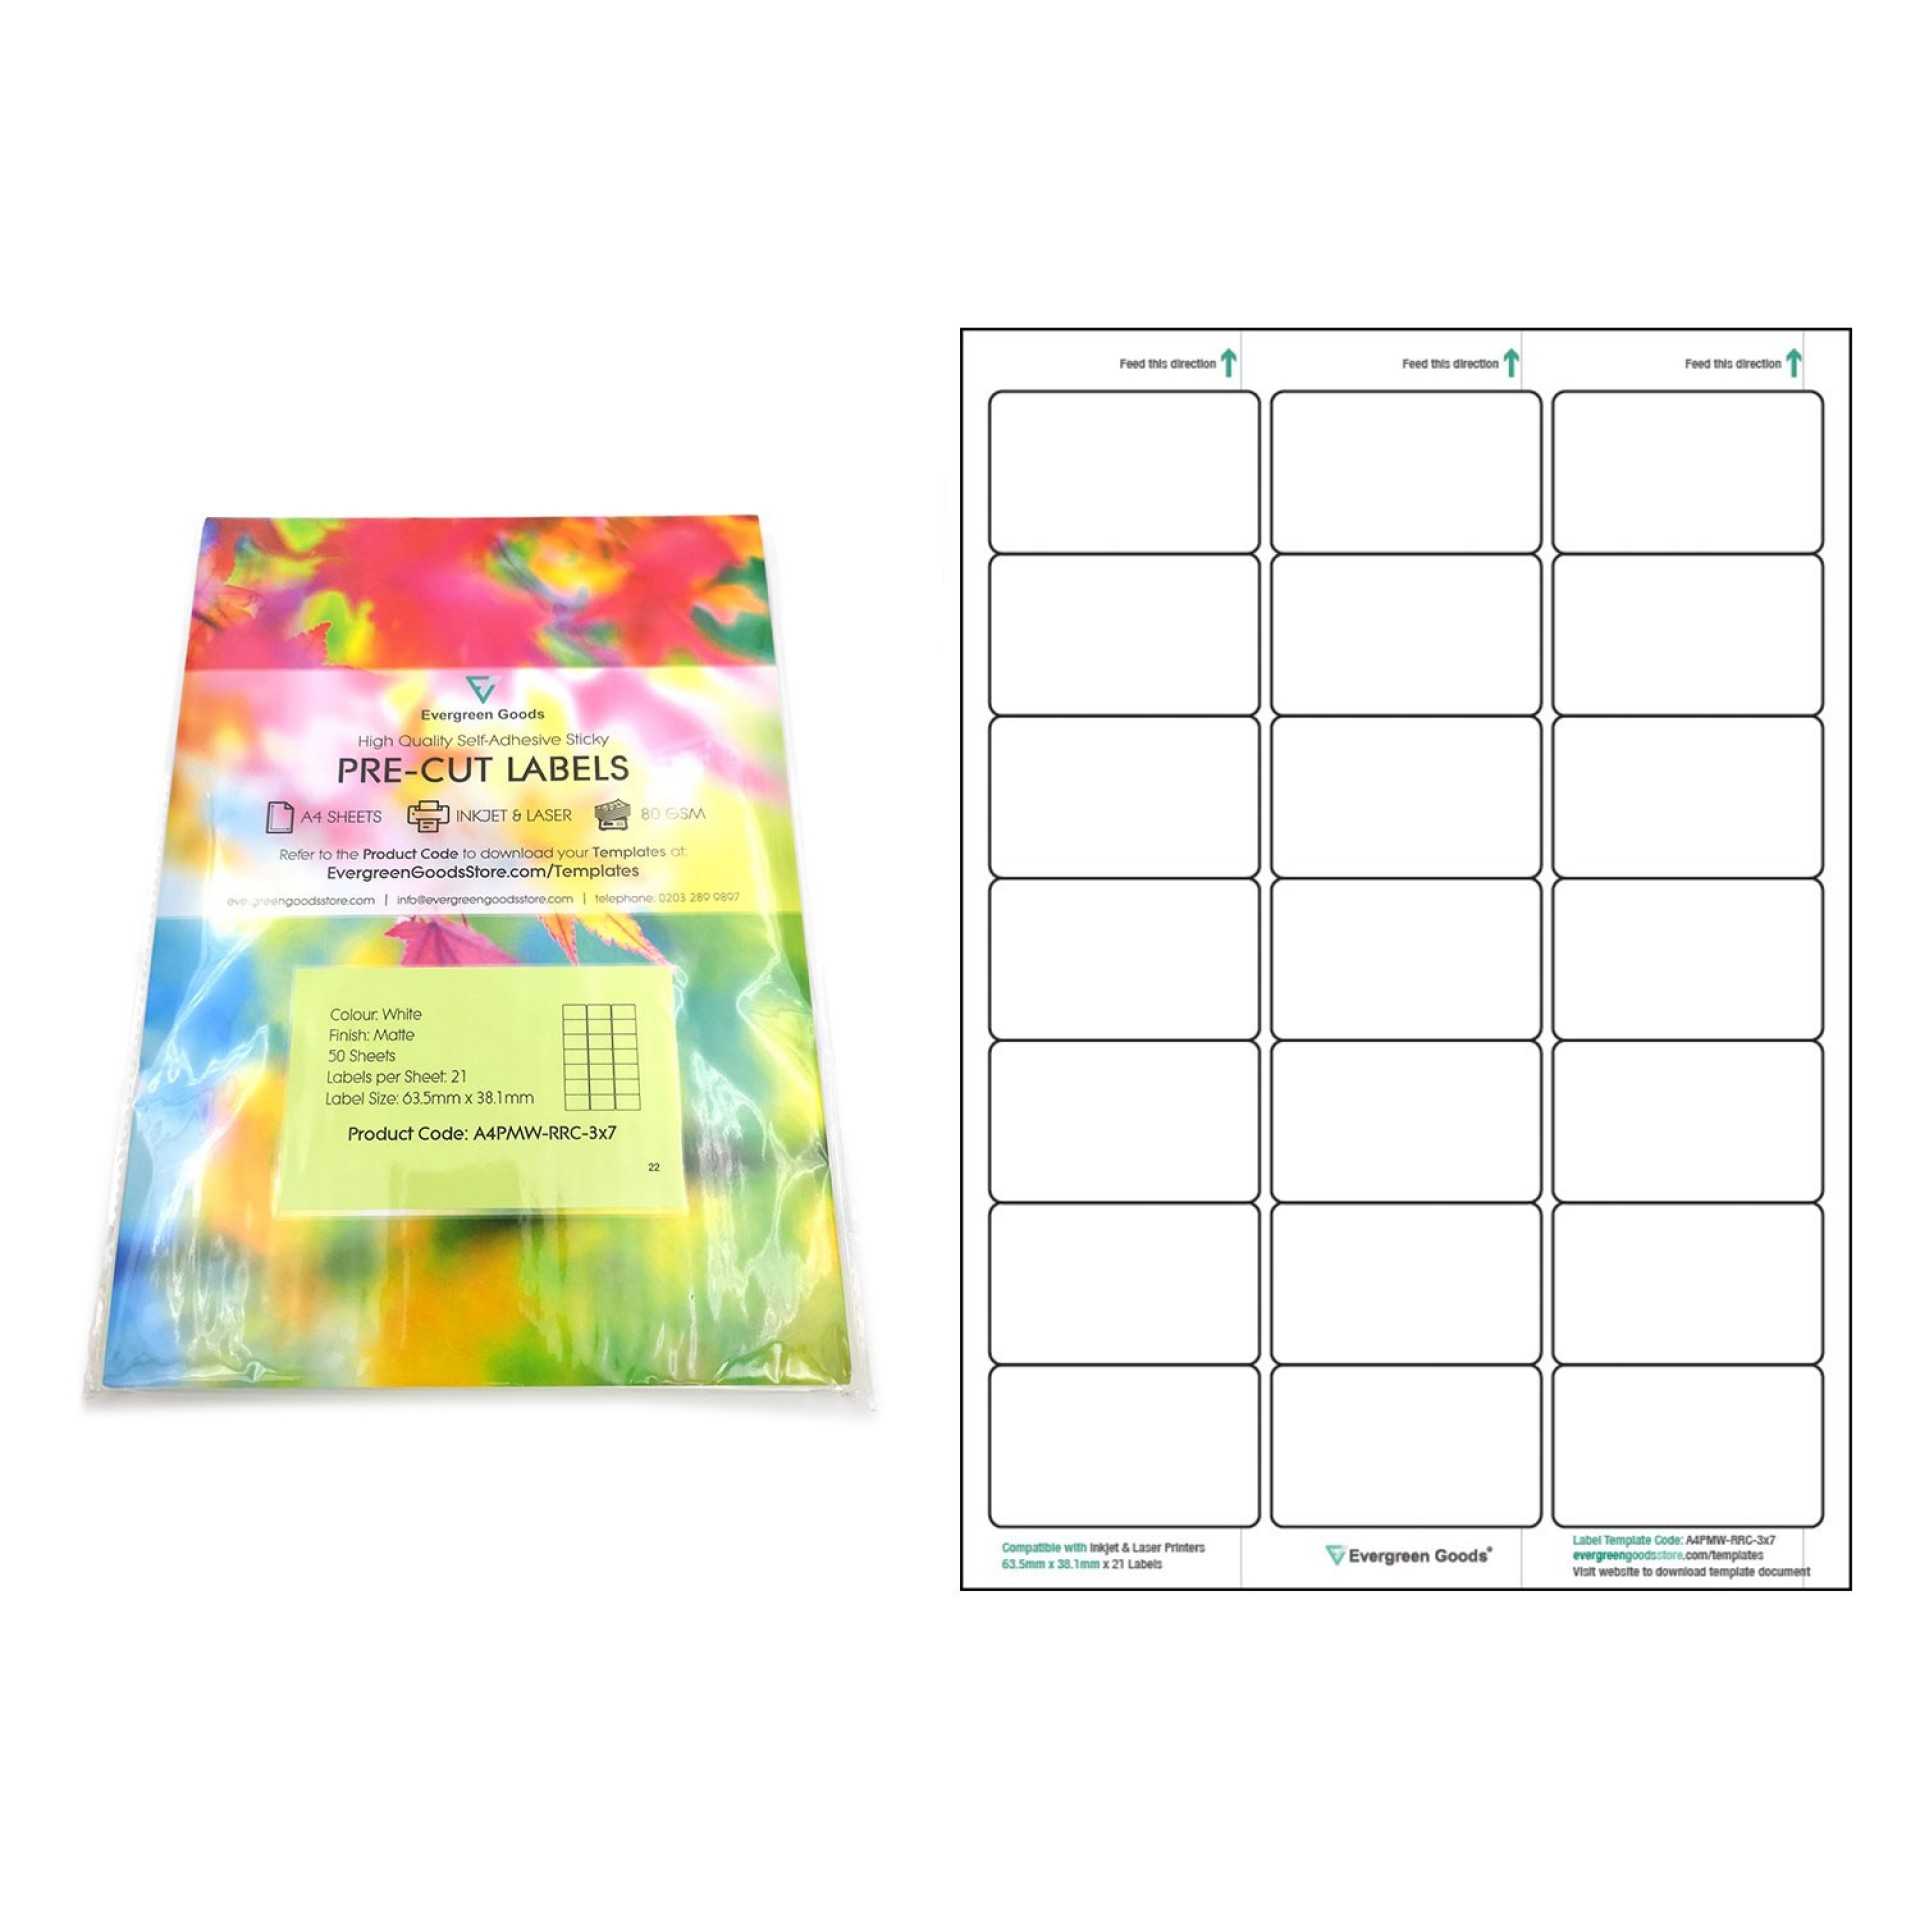 001 Word Label Template Per Sheet Ideas A4Pmw Rrc 3X7 Pertaining To Word Label Template 21 Per Sheet